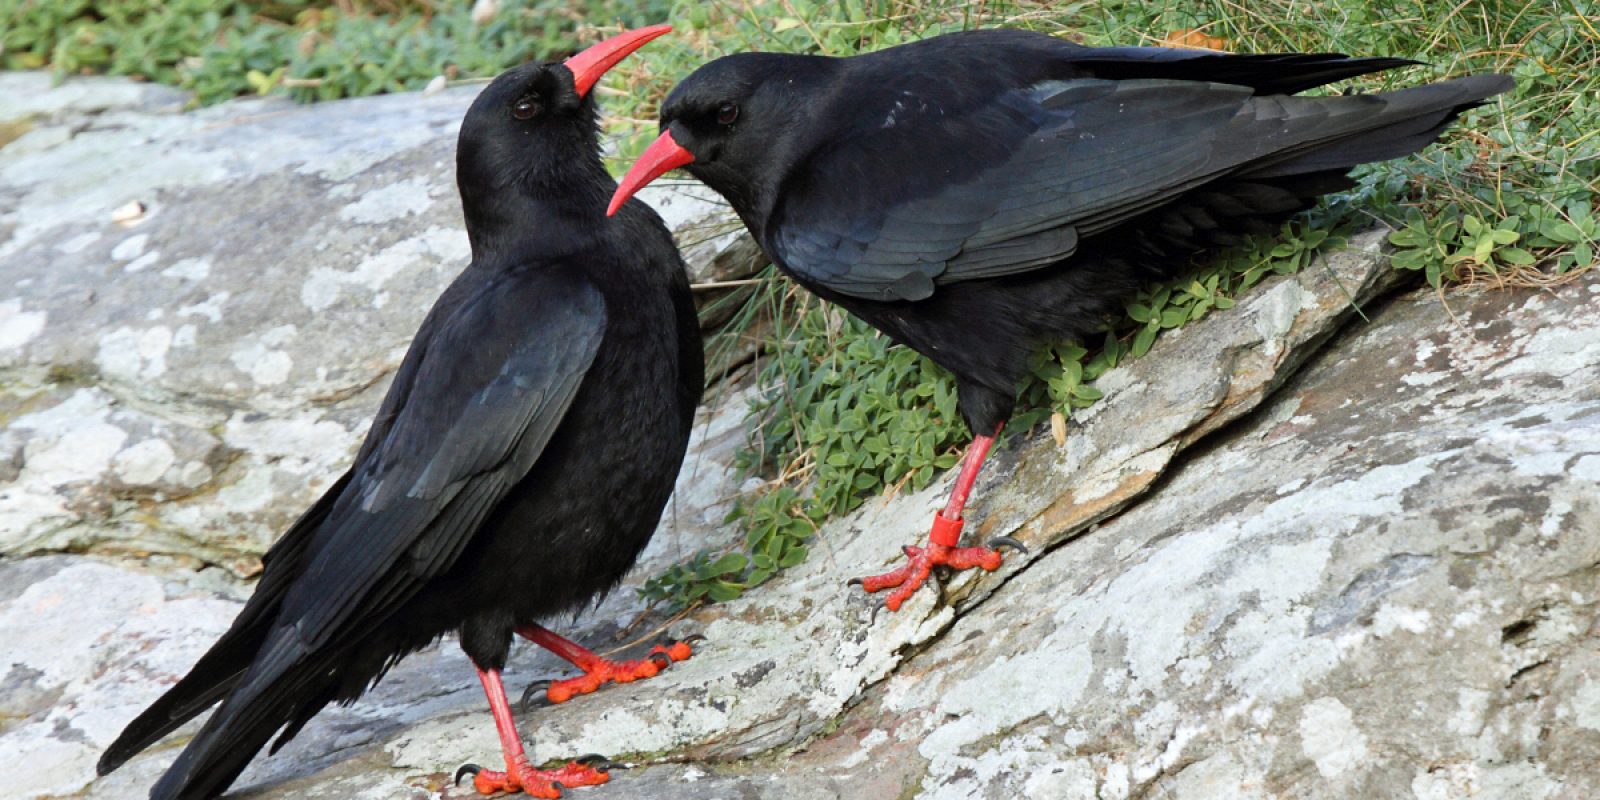 Chough (Pyrrhocorax pyrrhocorax) on typical sea-cliff habitat in the Isle of Man. Photograph by Neil G. Morris